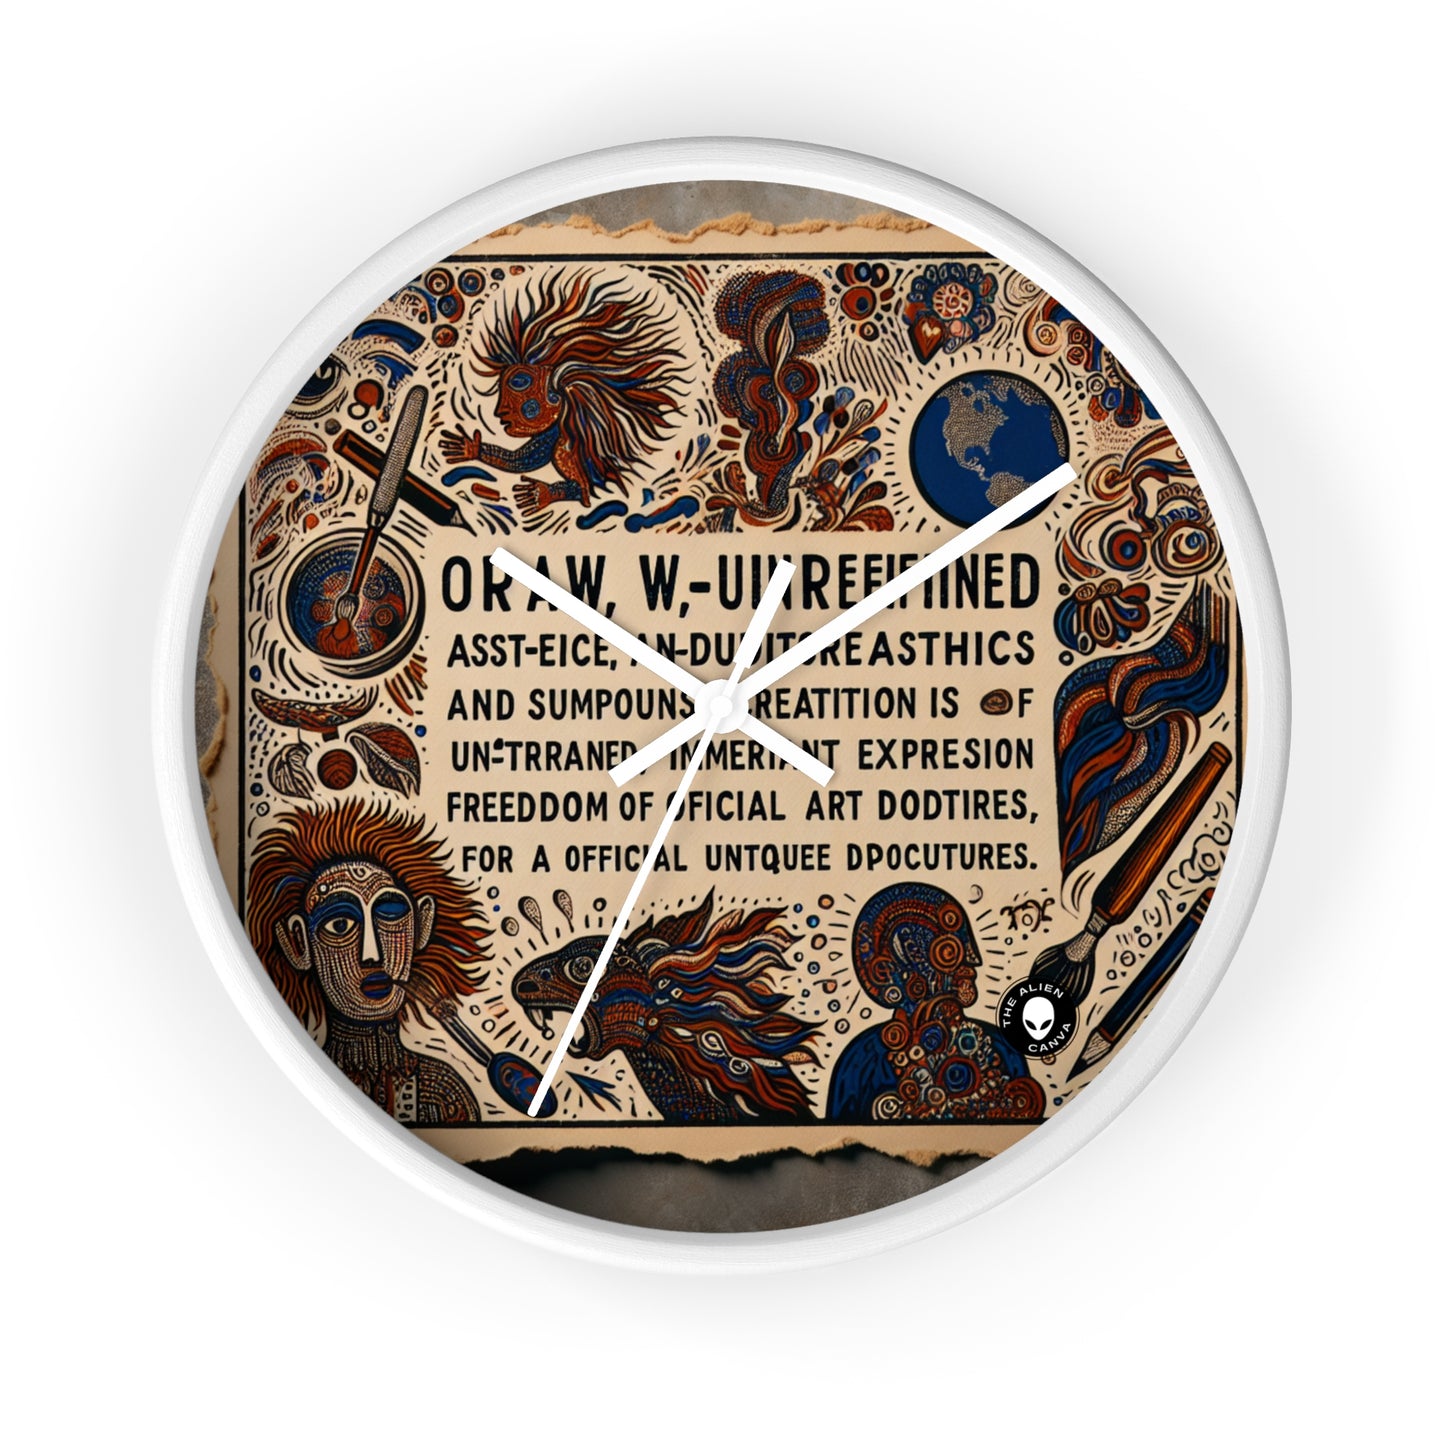 "Visions of the Beyond: A Surreal Dreamscape" - The Alien Wall Clock Outsider Art